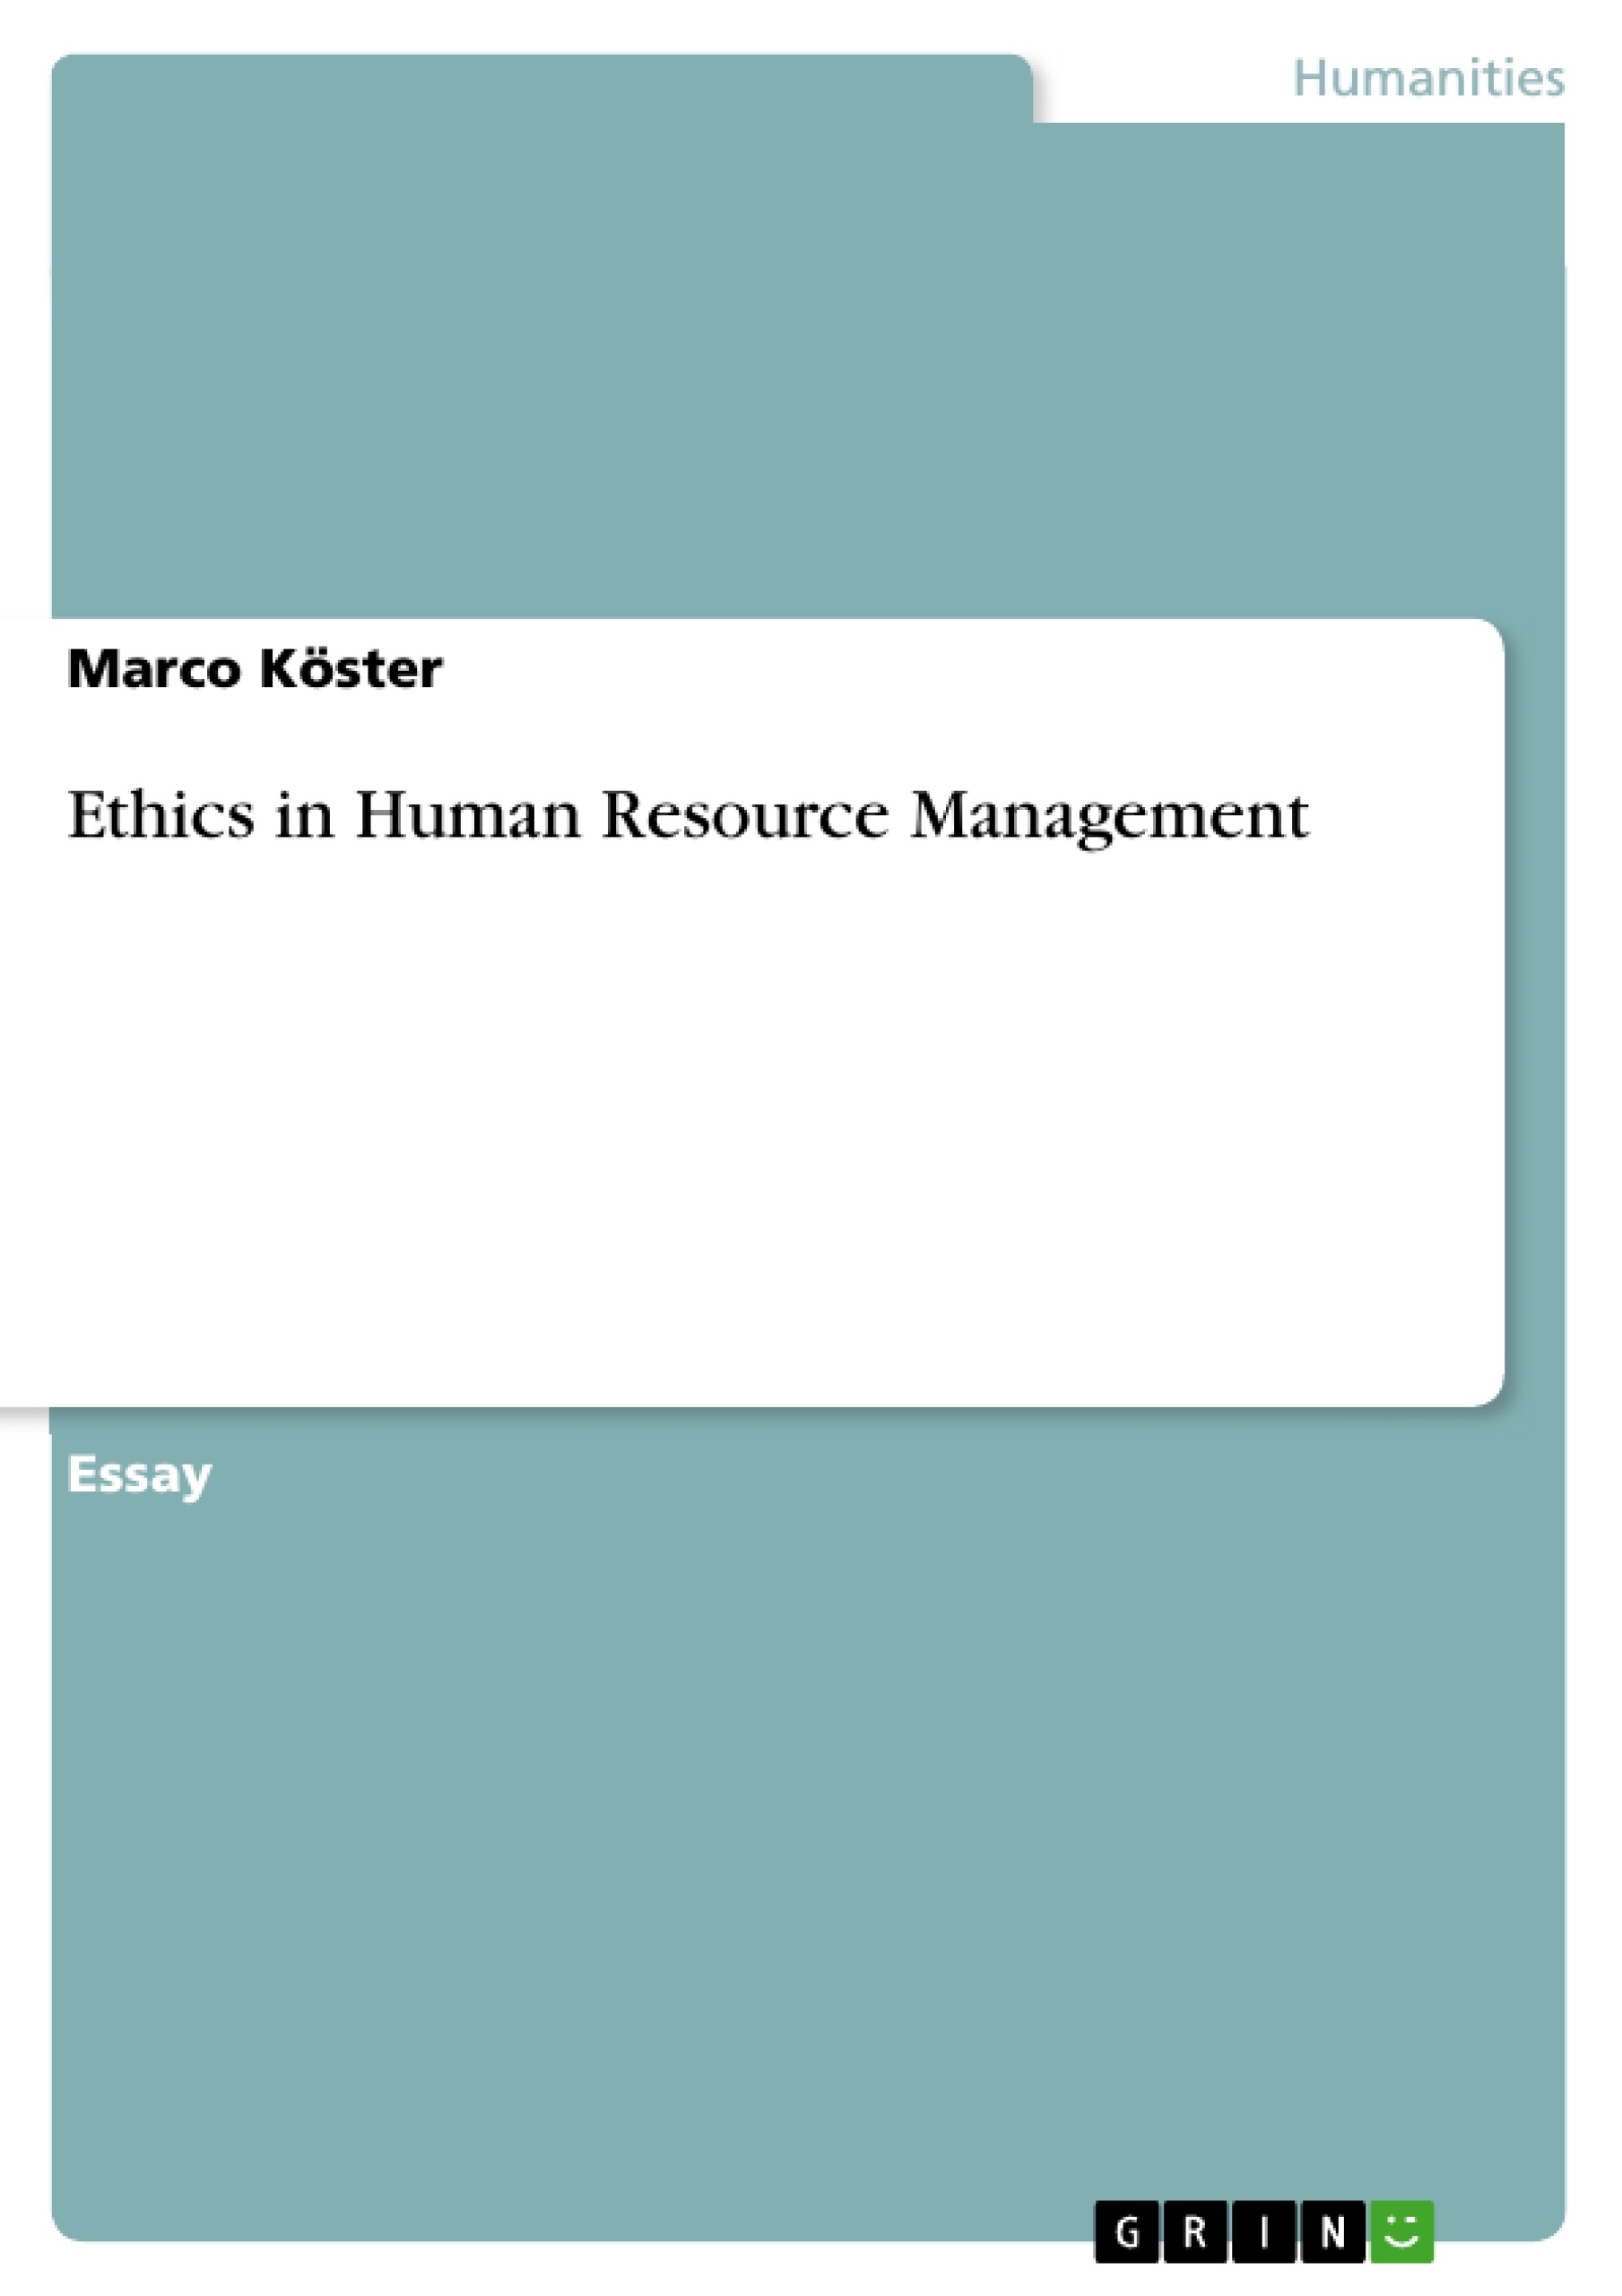 Title: Ethics in Human Resource Management